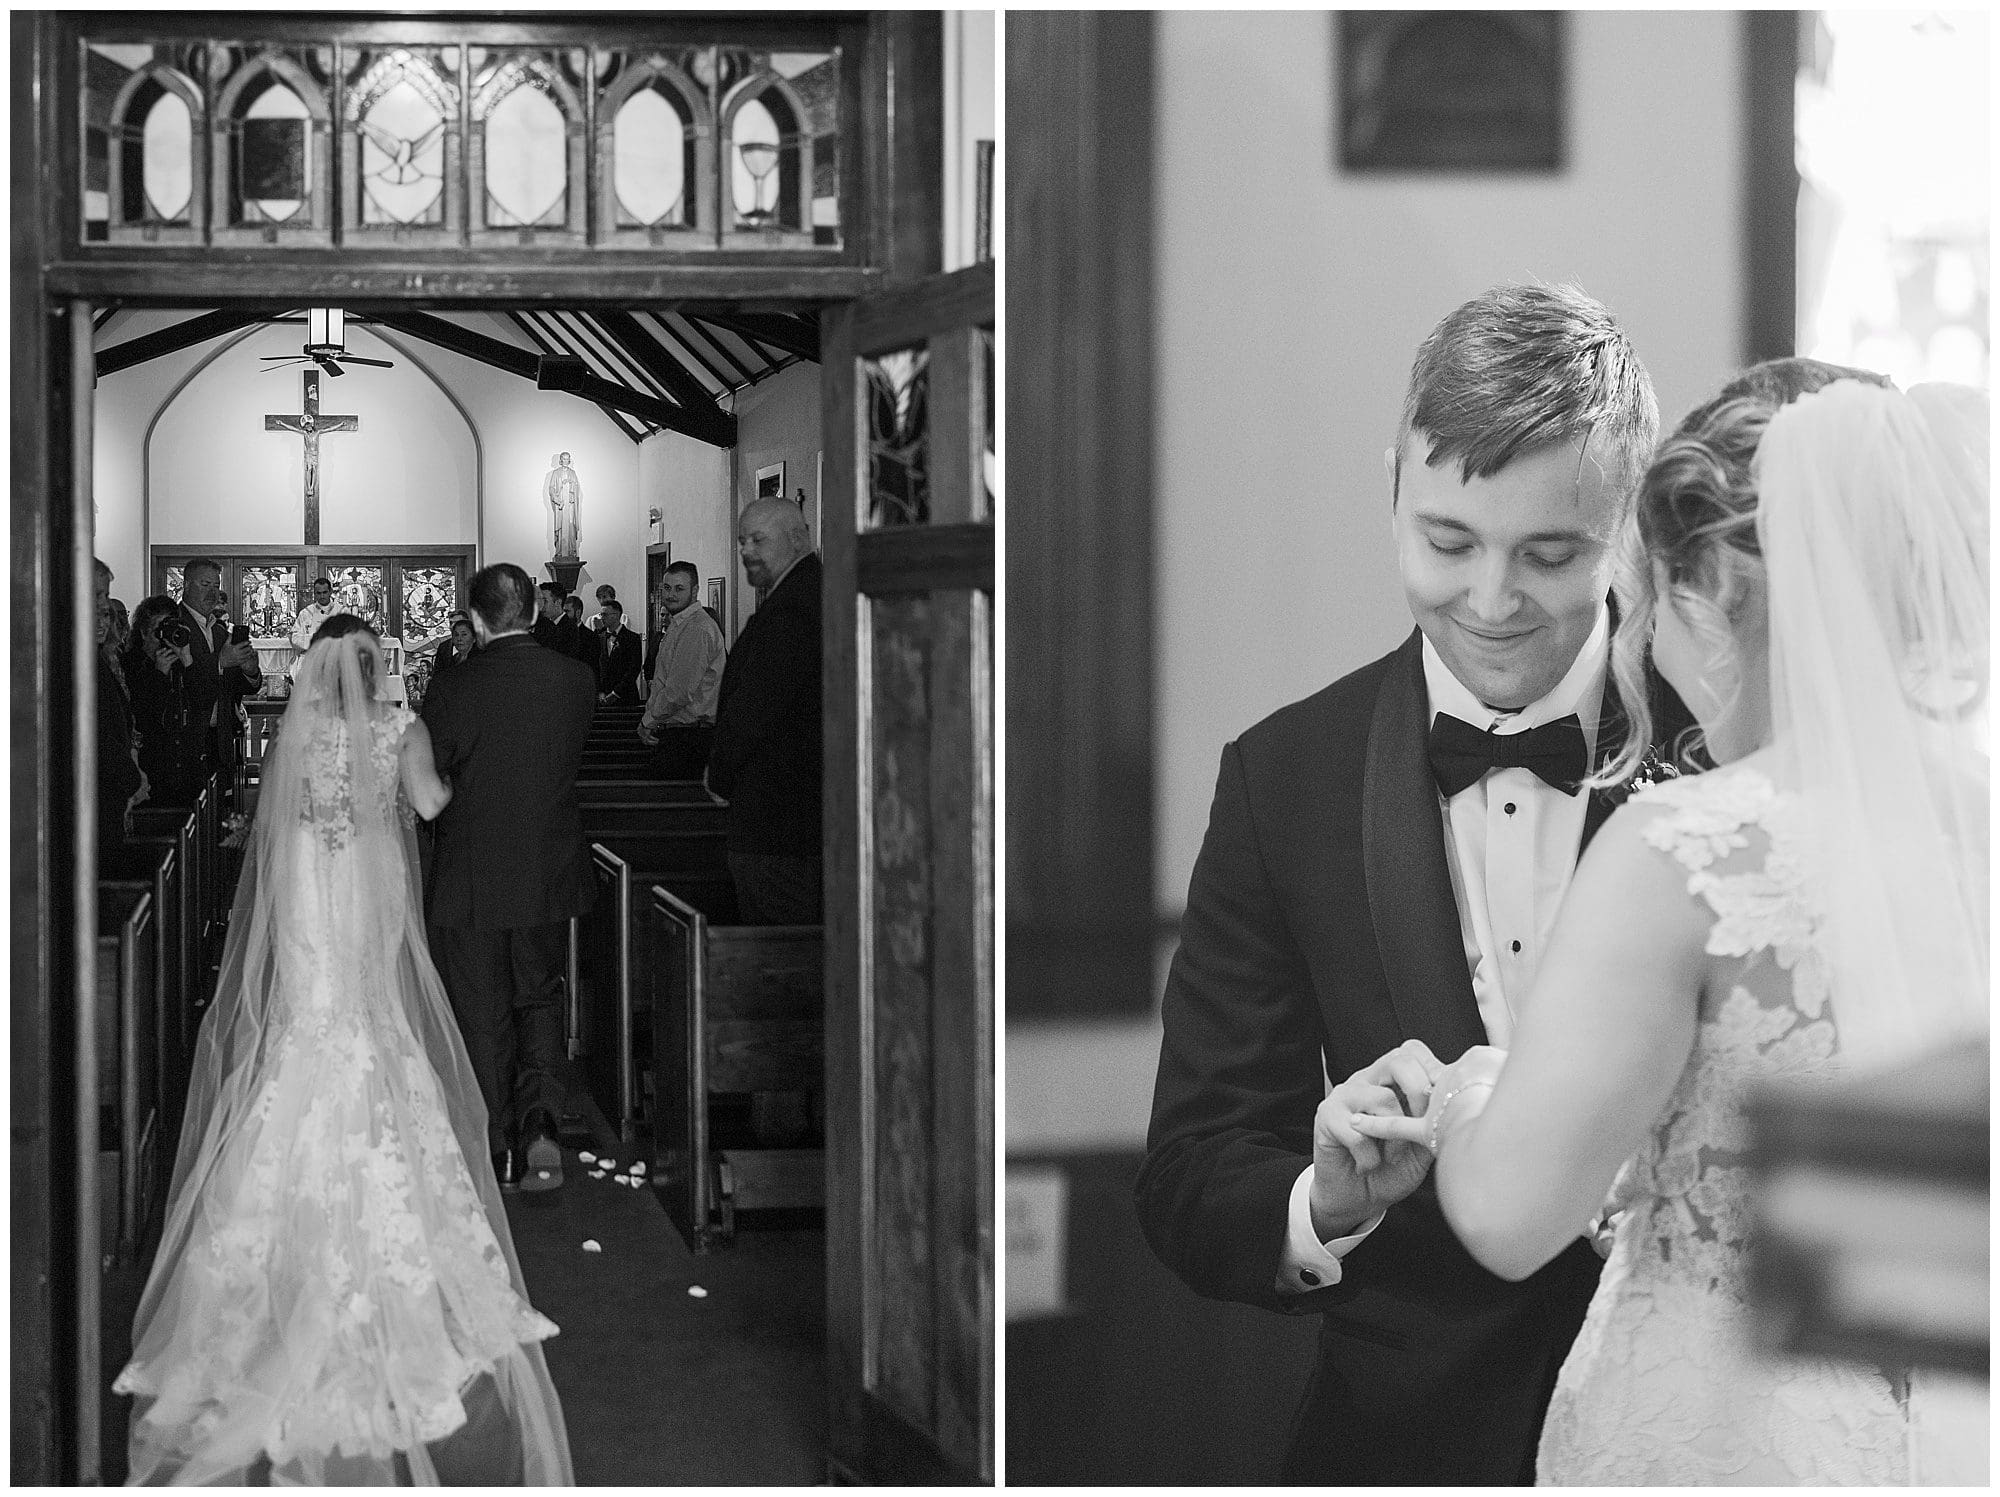 Black and white wedding photos: the first shows a bride walking down the aisle in a church, the second captures a groom placing a ring on the bride's finger.